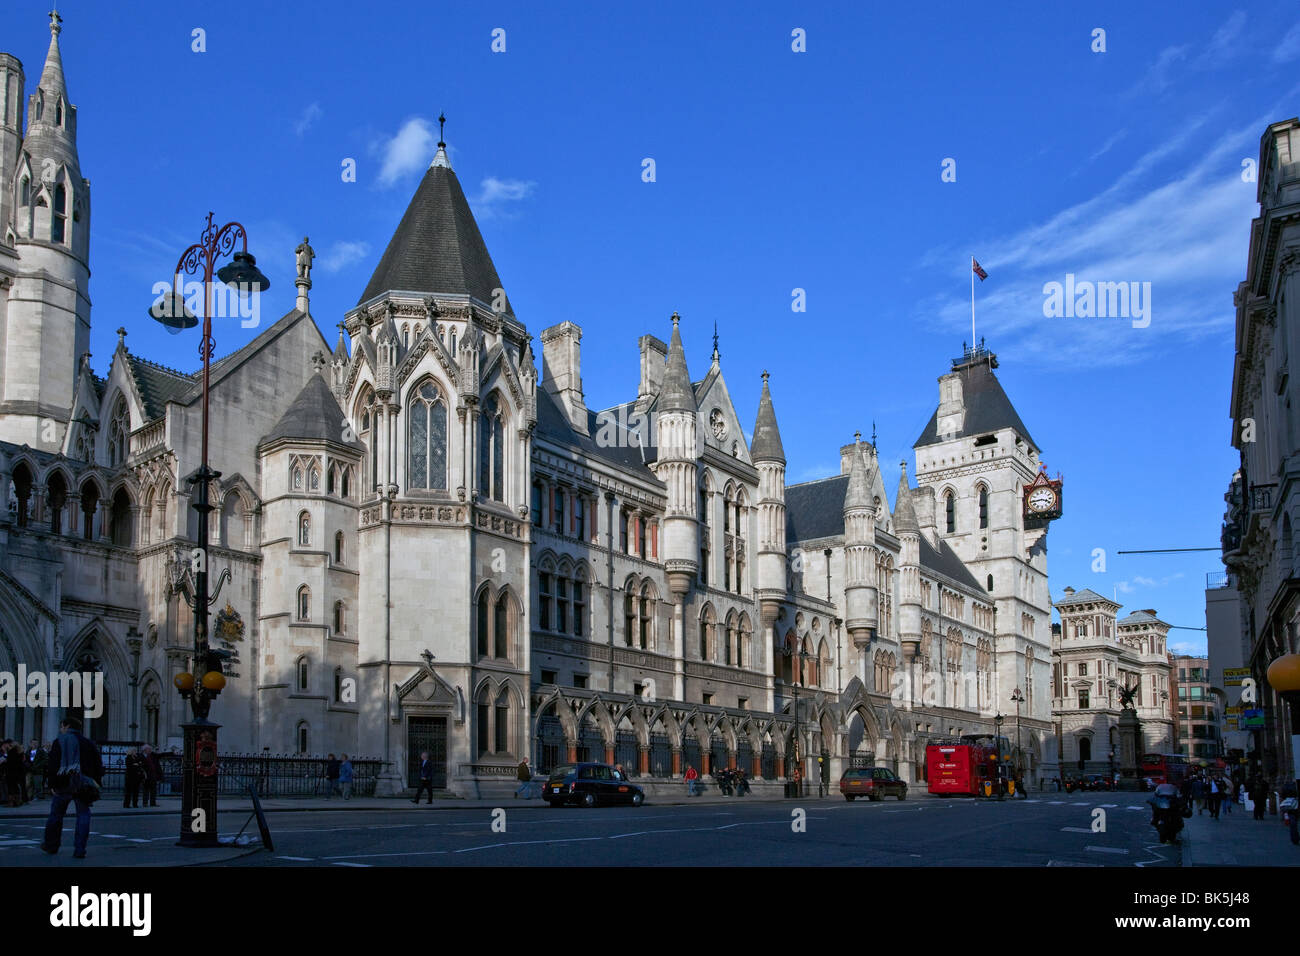 The High Court of Justice, London, UK Stock Photo